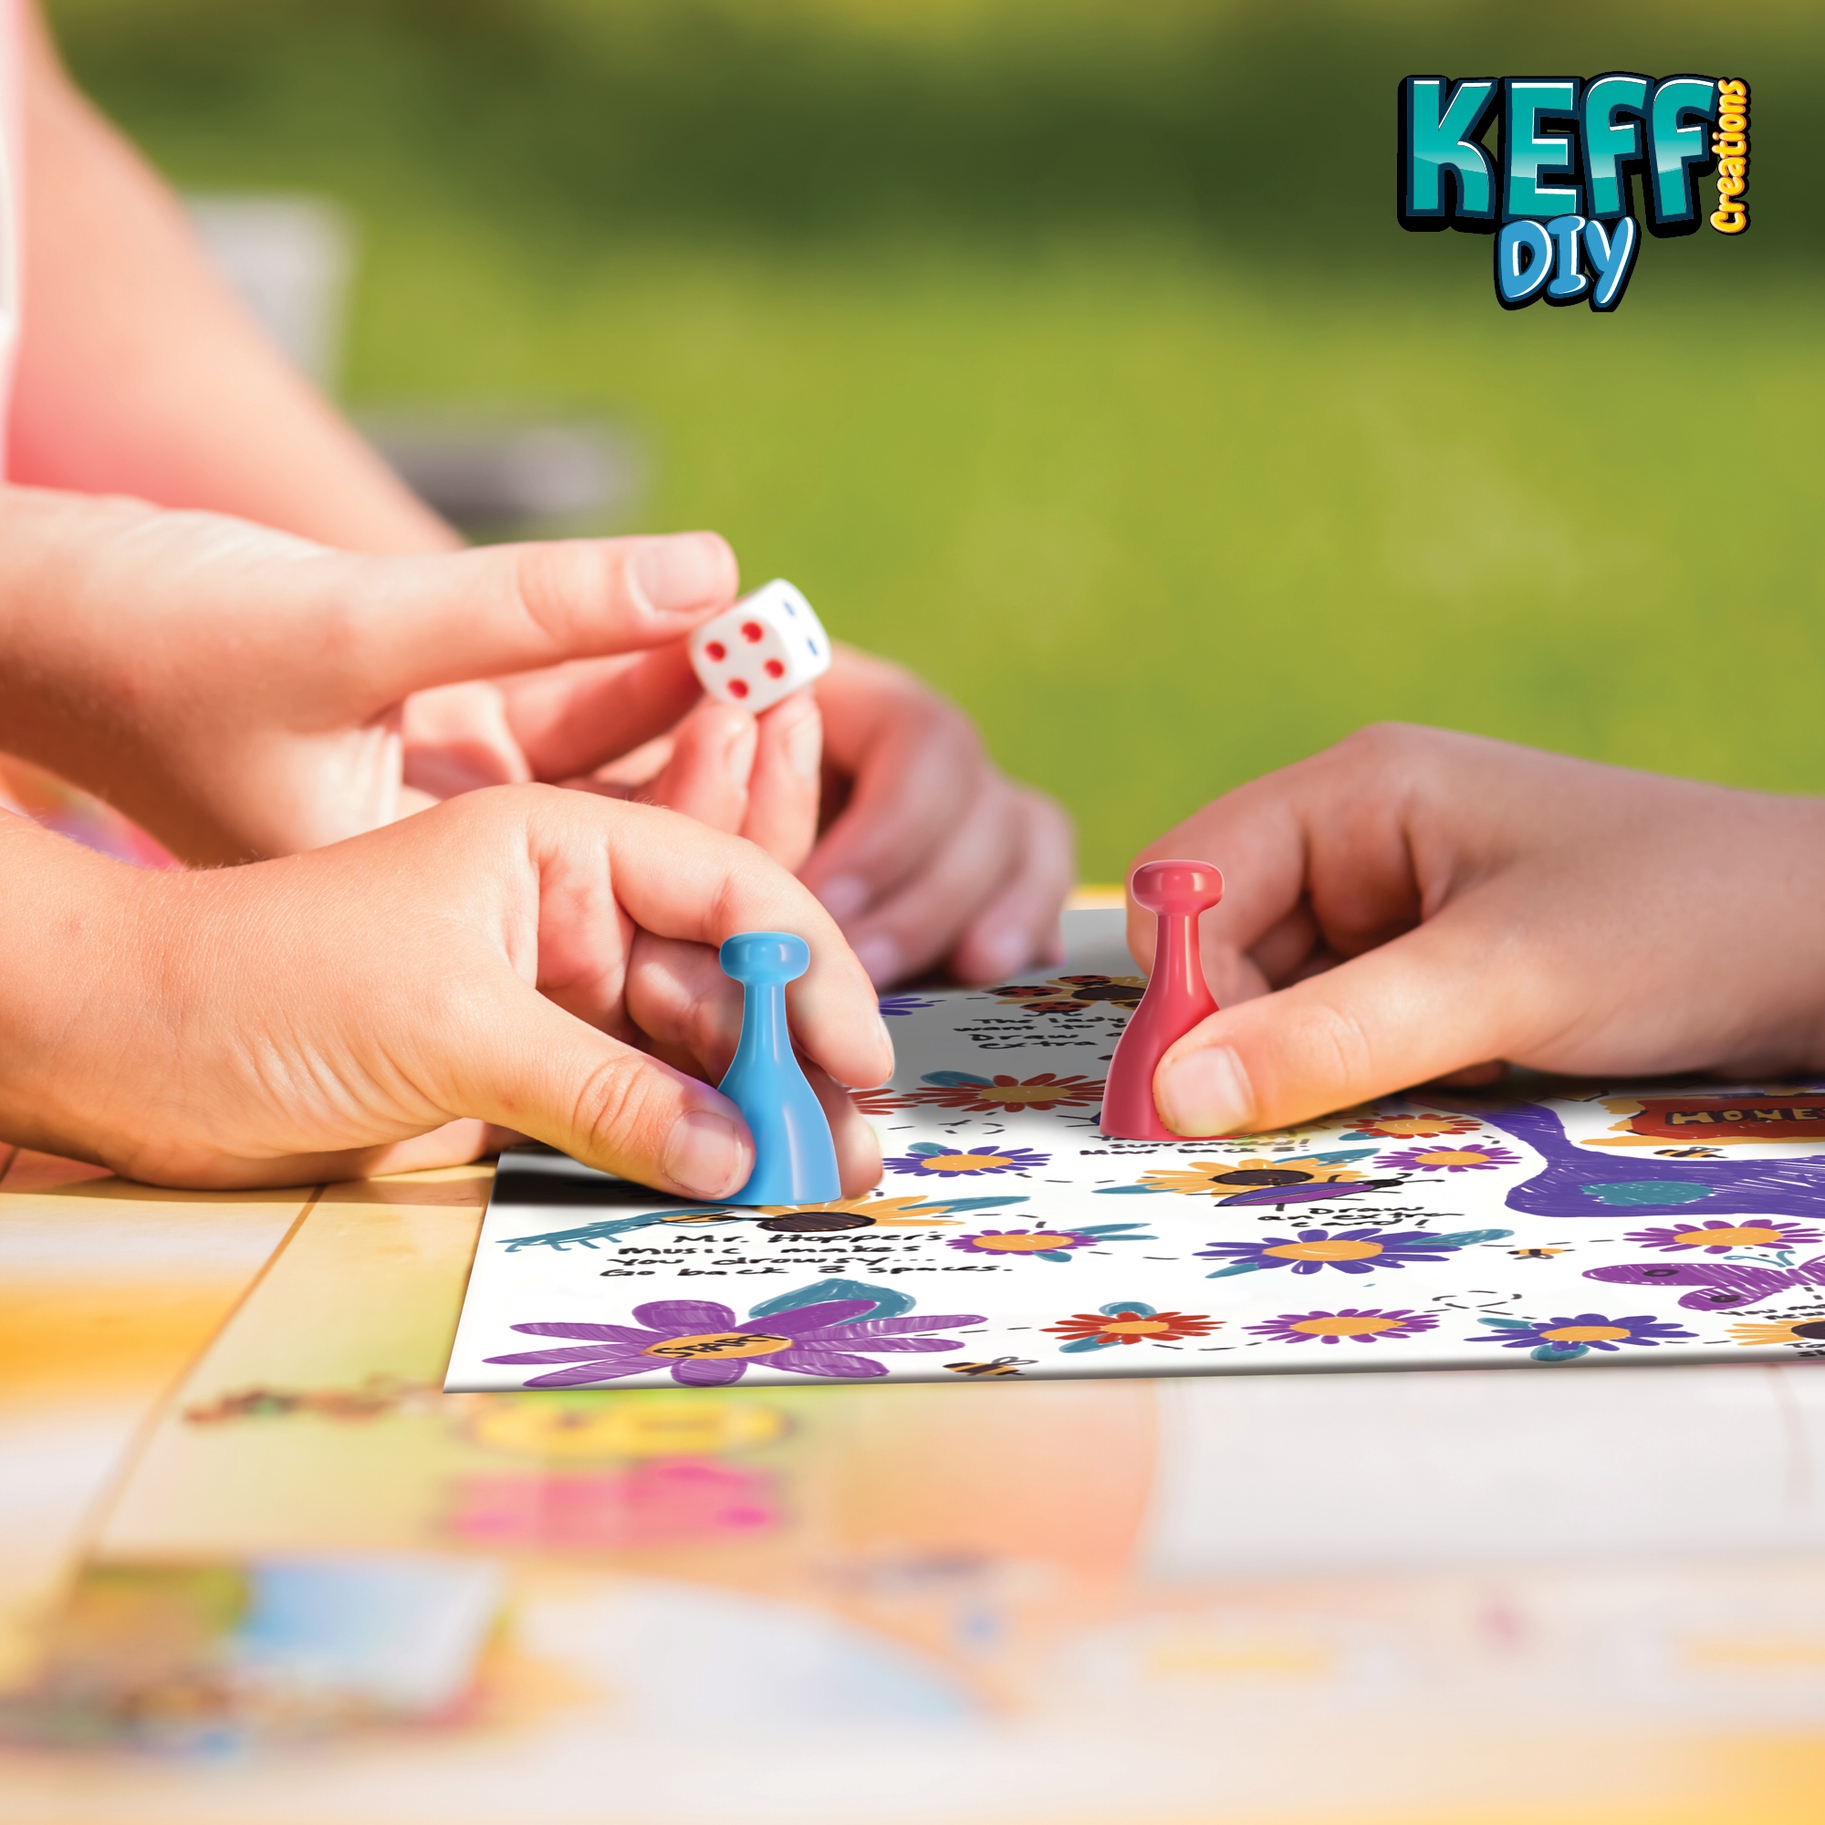 Create your own board game art kit for kids